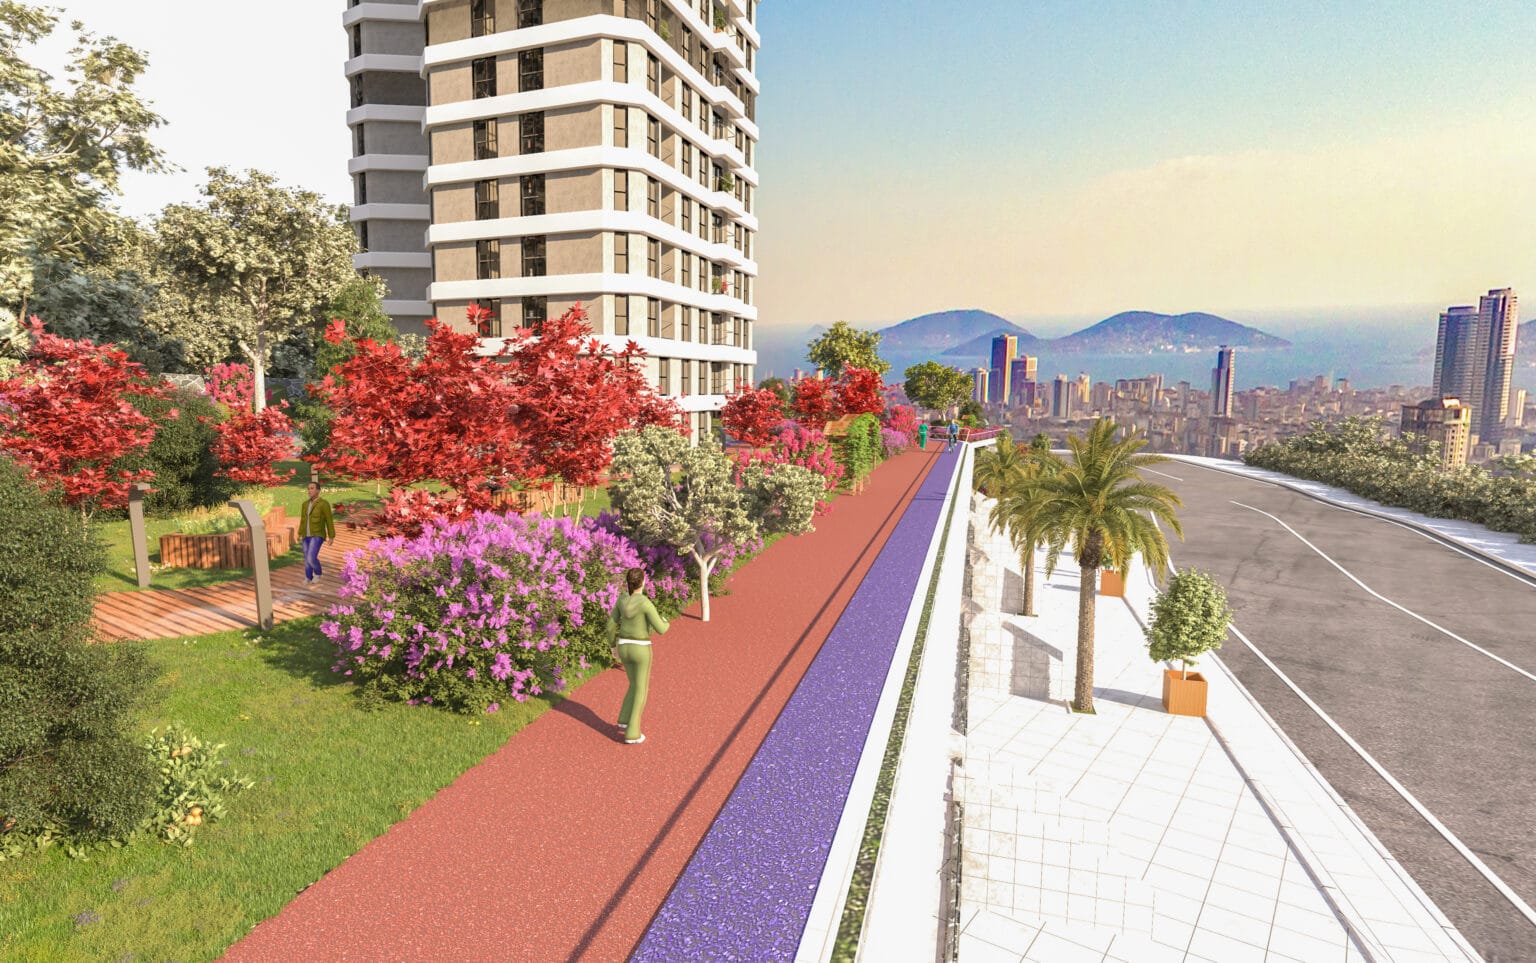 Investment apartments in rapidly growing Kartal